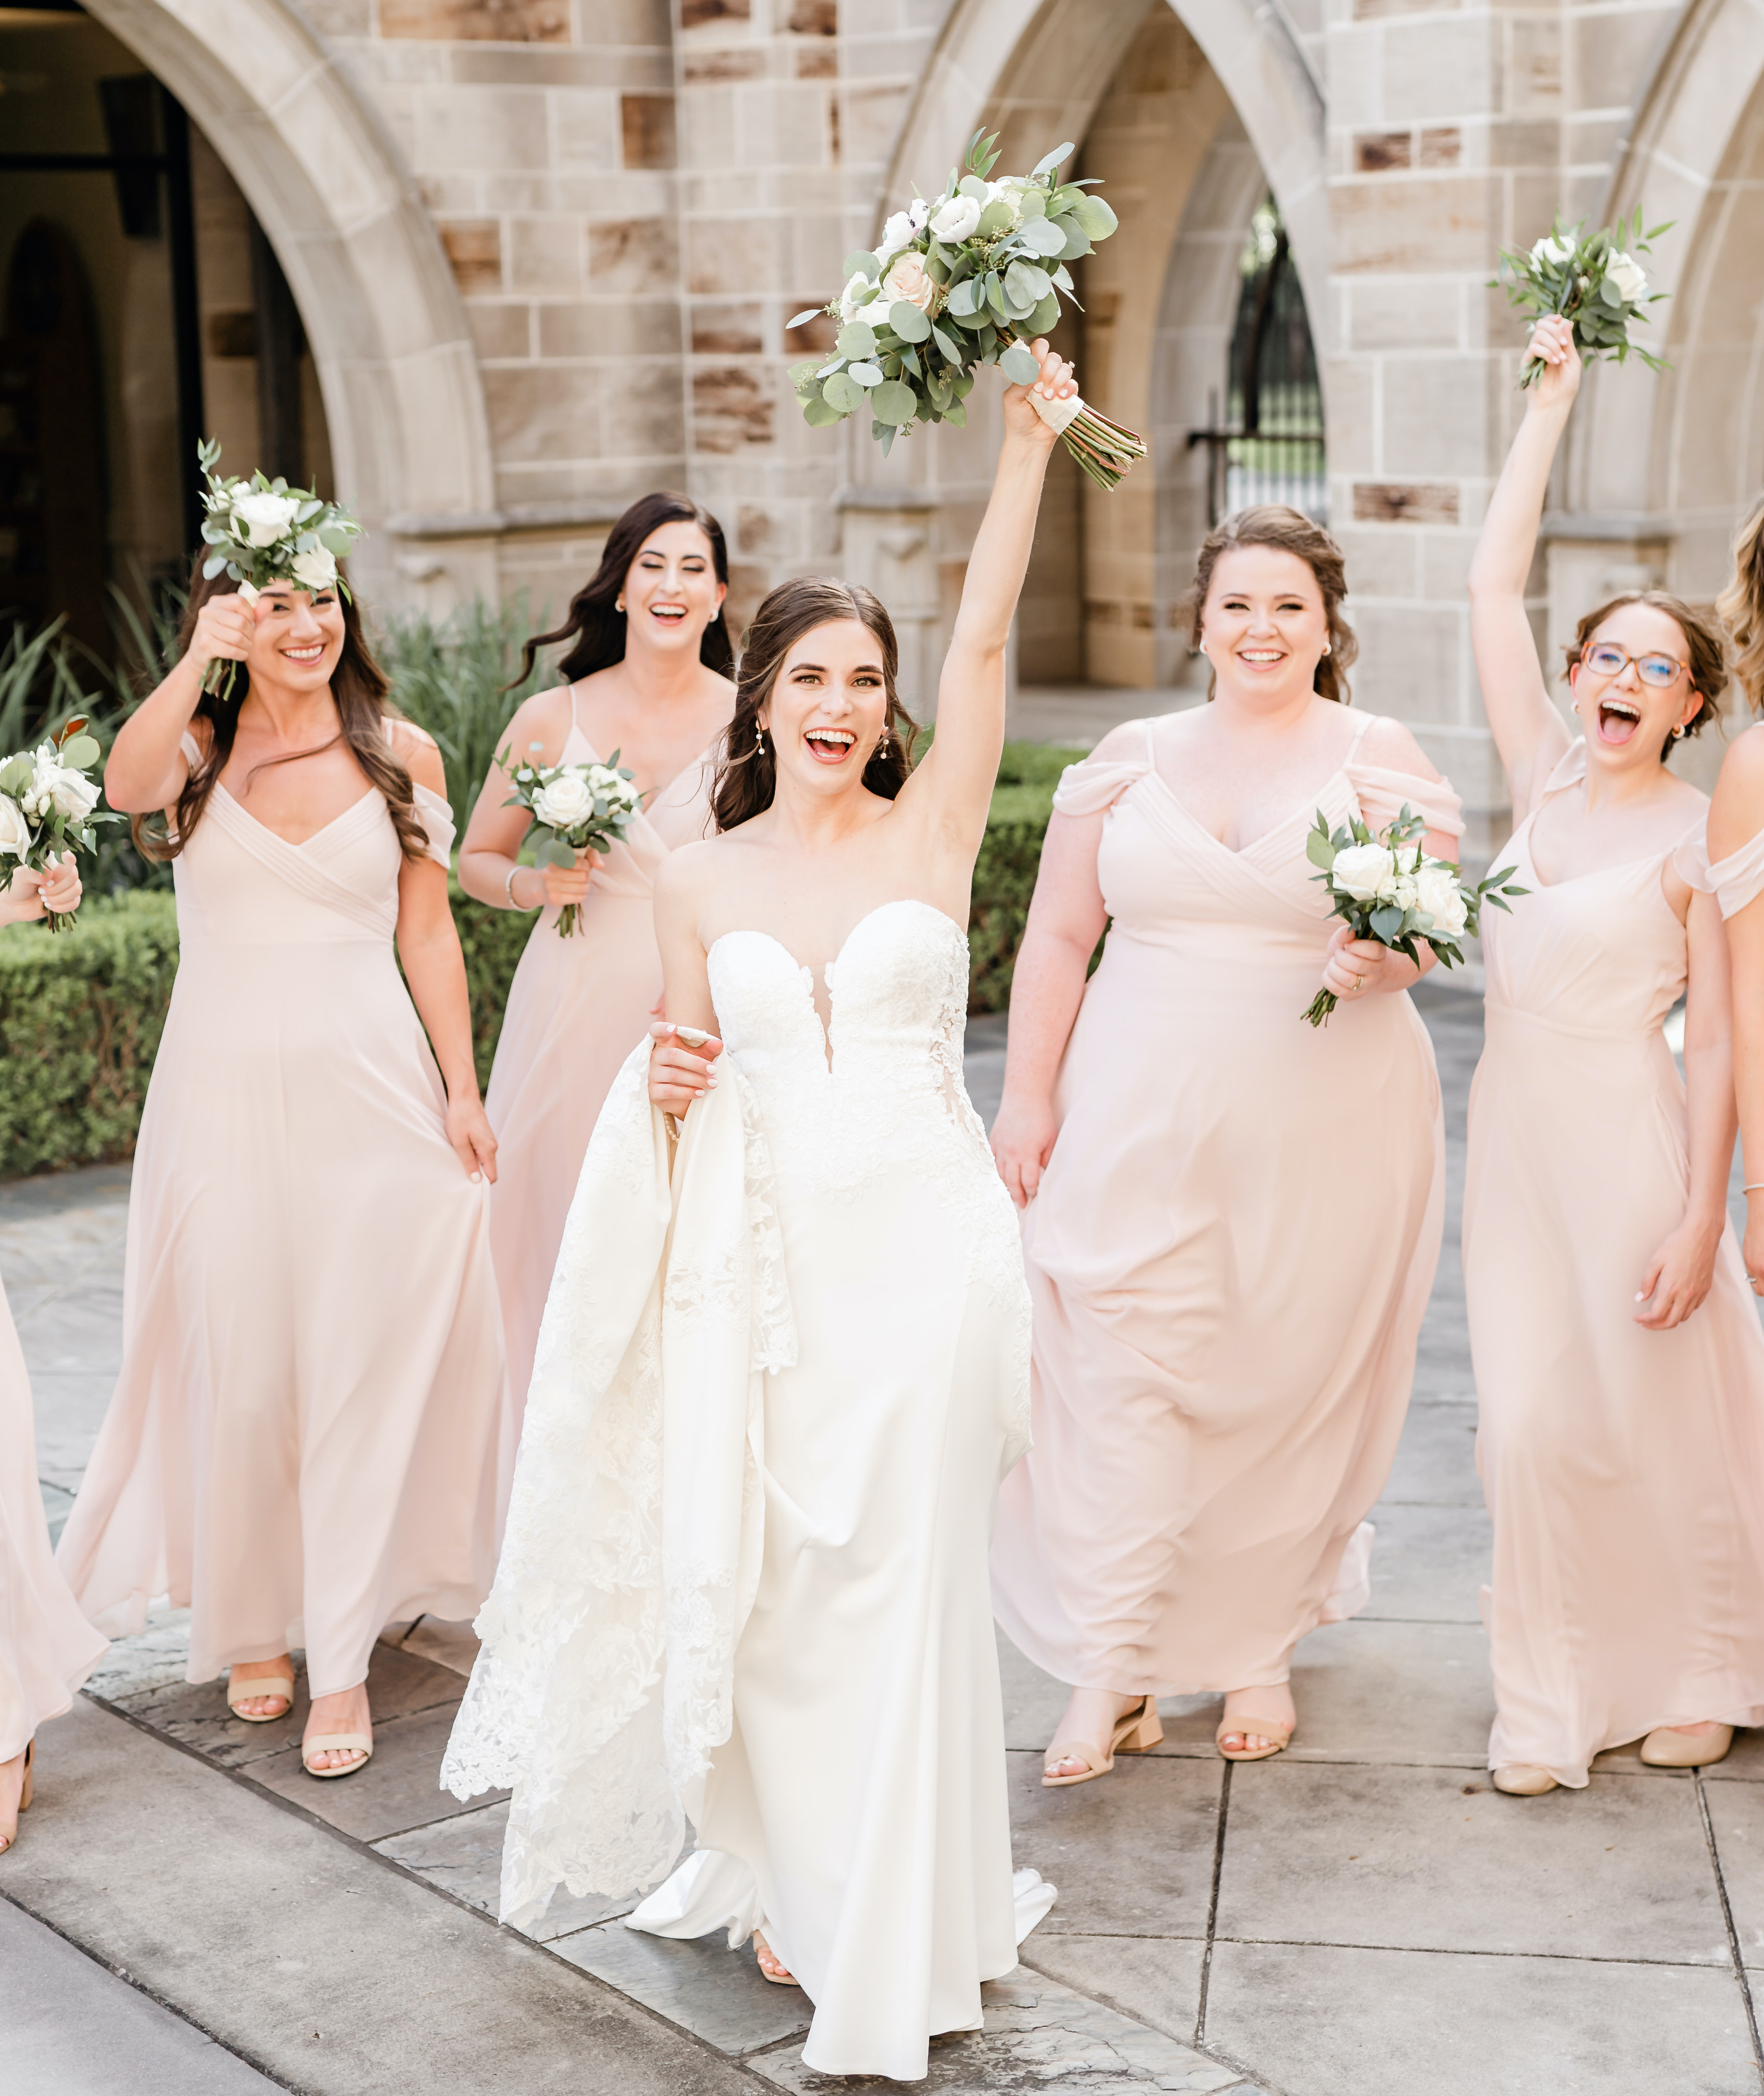 A bride holds her bouquet in the air while her bridesmaids follow behind her.